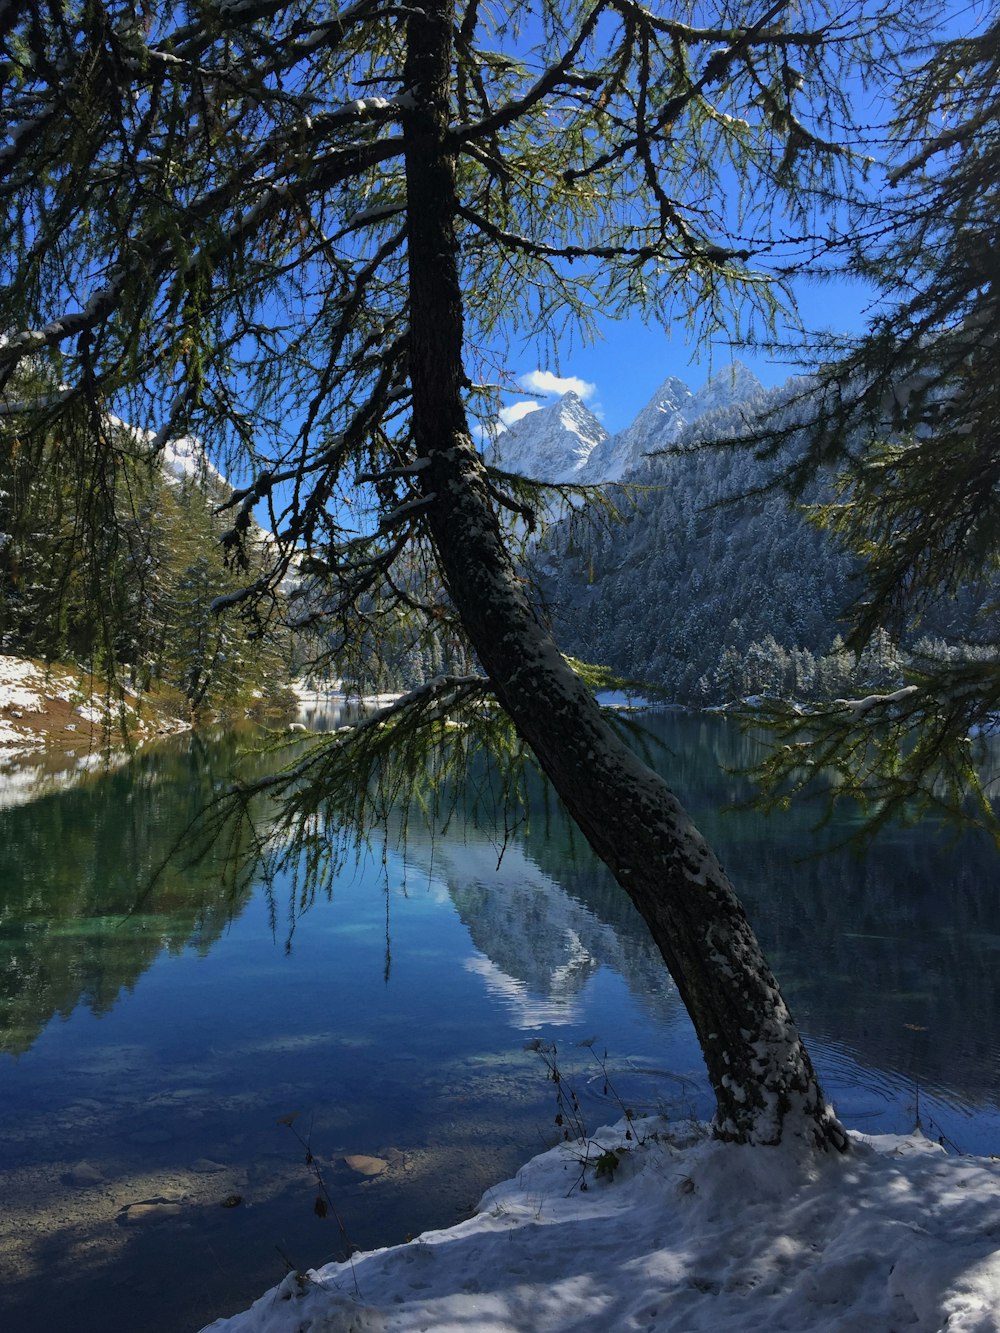 a tree leaning over a lake with a mountain in the background